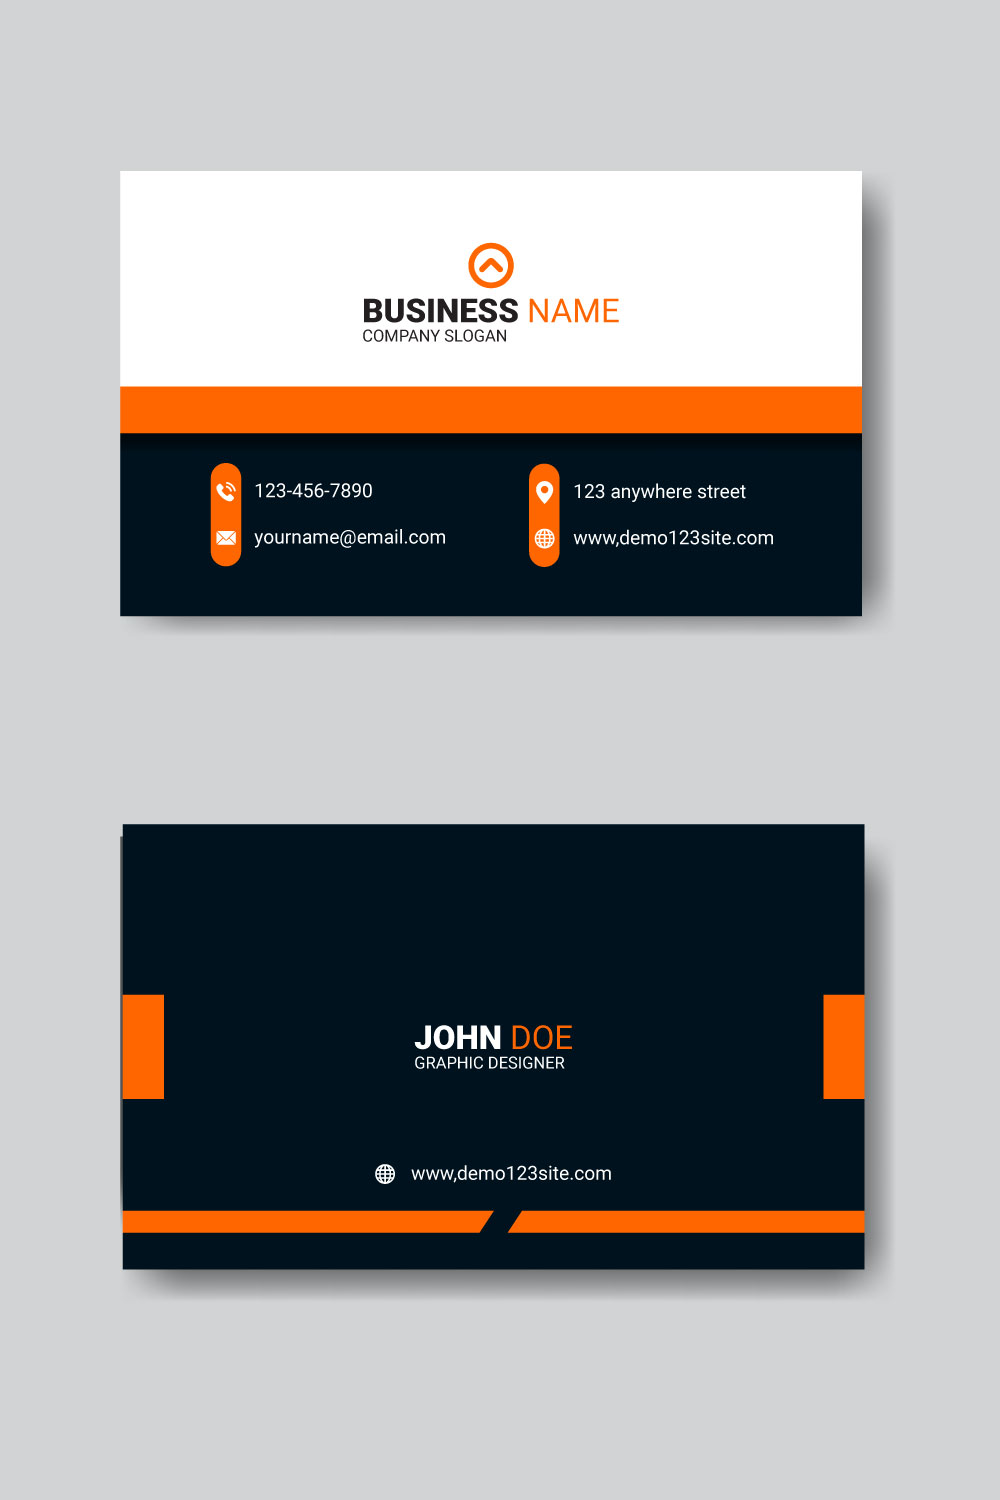 Business card layout design pinterest preview image.